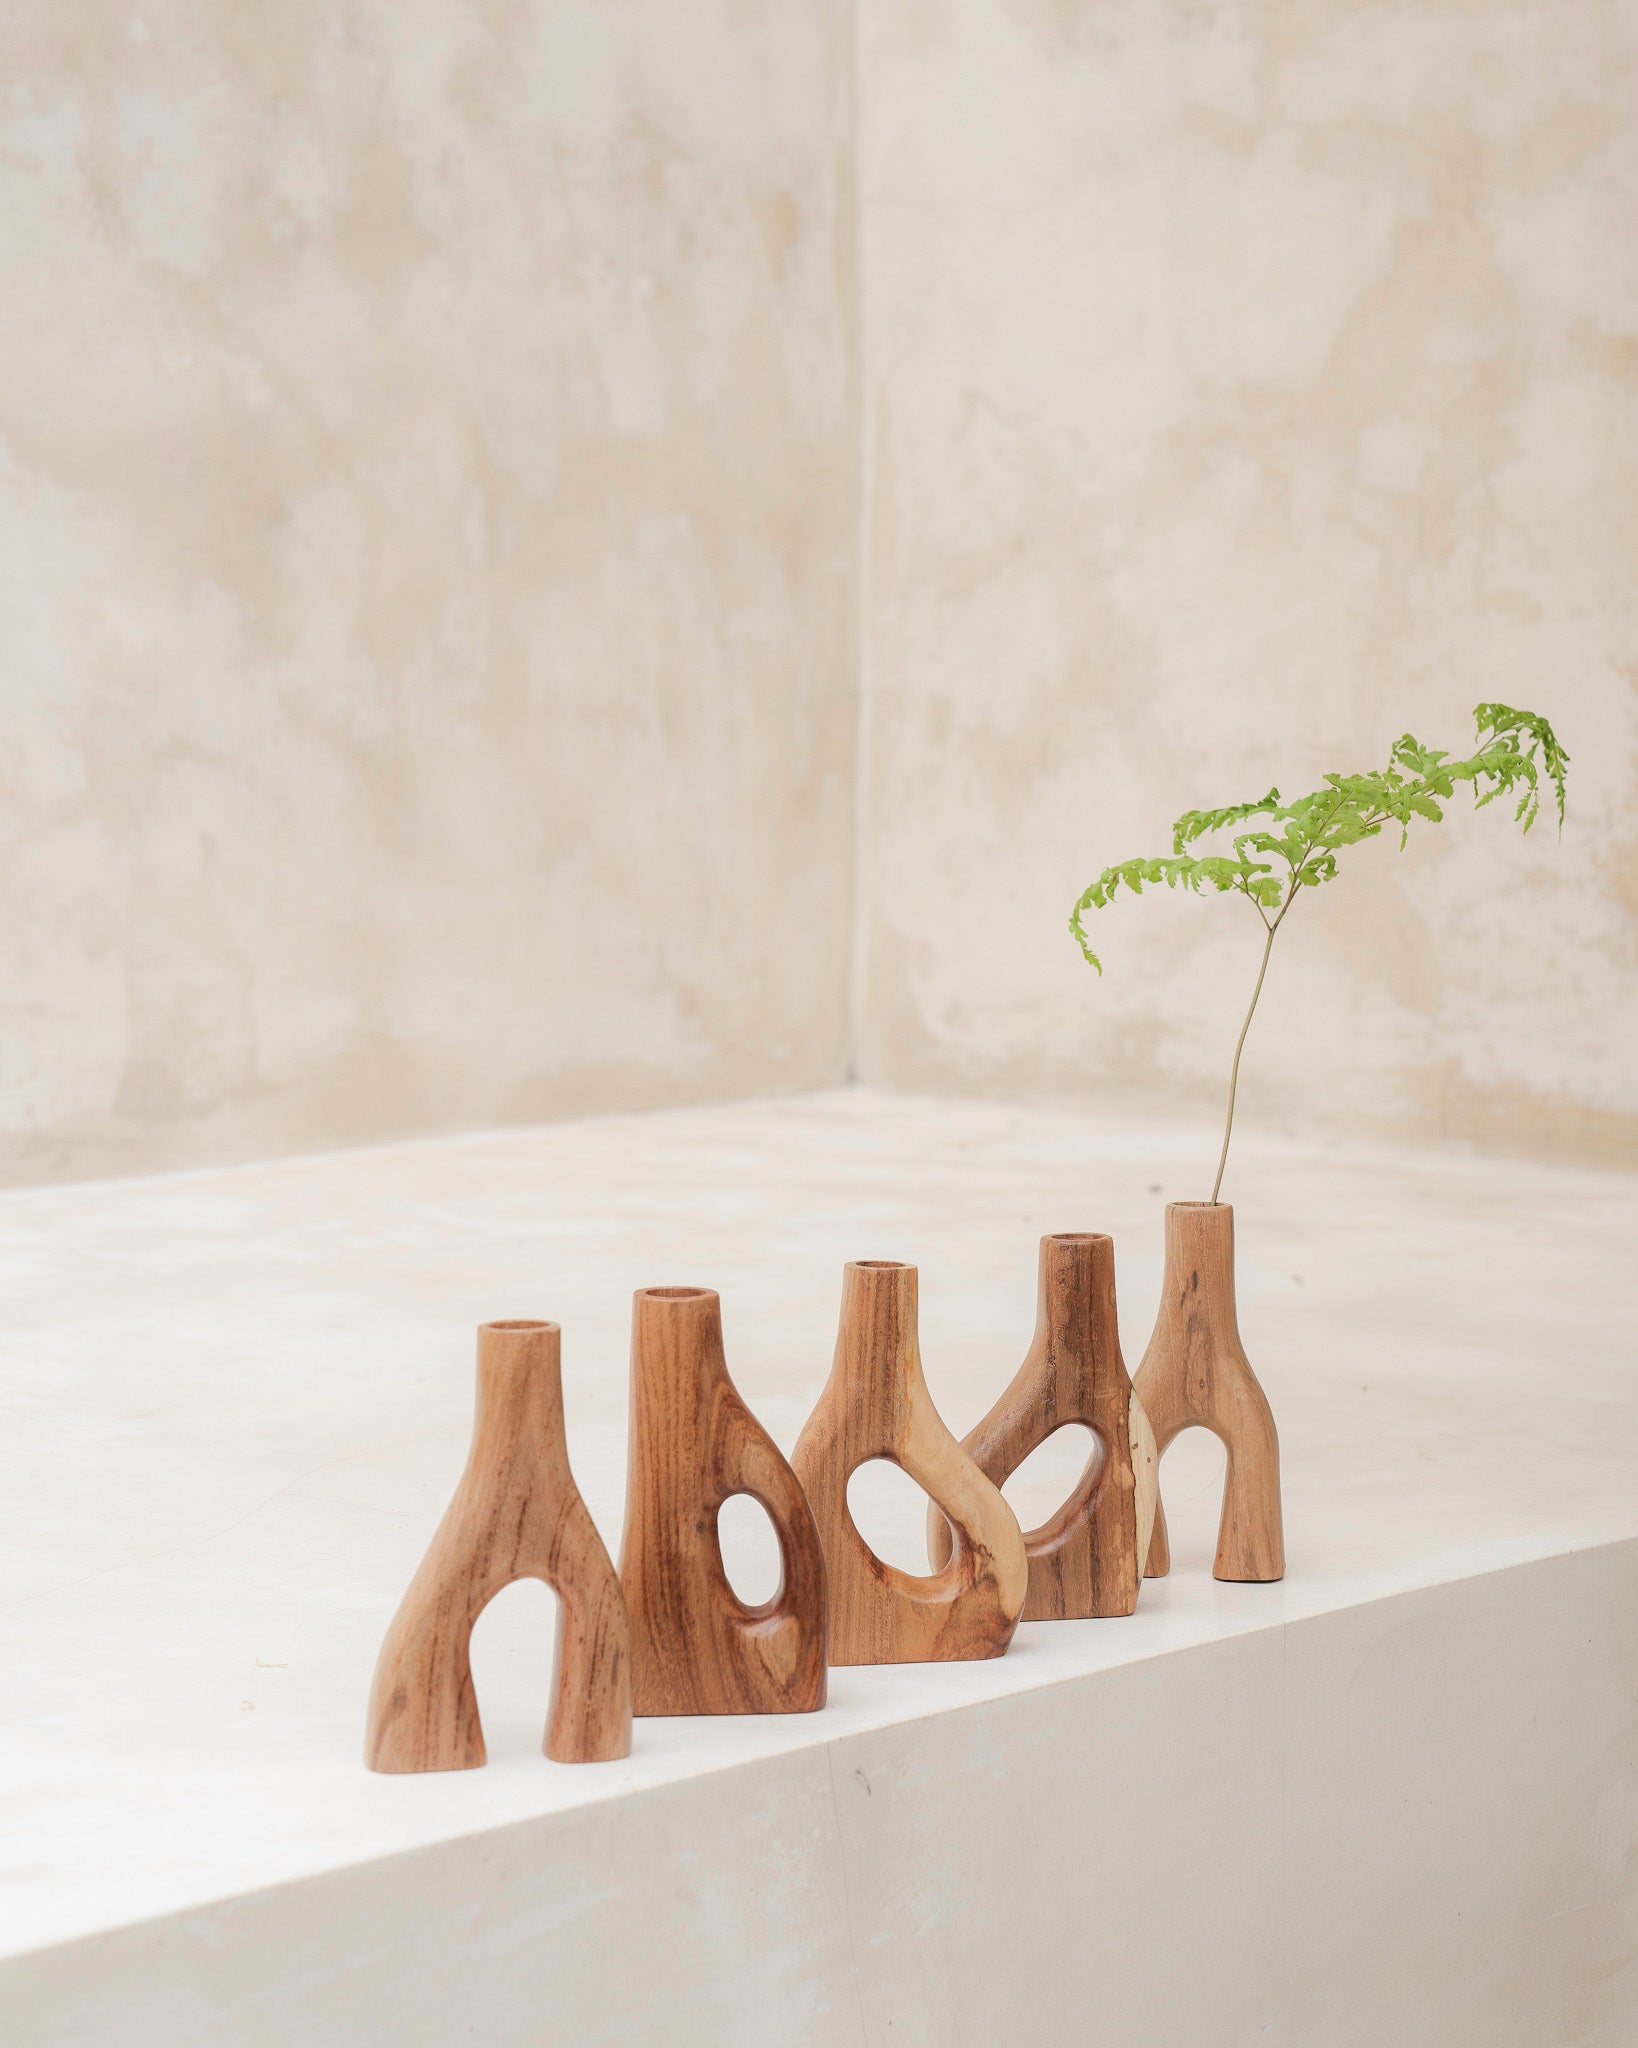 Explore our recycled teak wood vases, perfect for any home. Ethically made, these vases support sustainability and add a touch of mindfulness to your decor. Ideal for both dry and fresh flowers, they embody simple, elegant design.